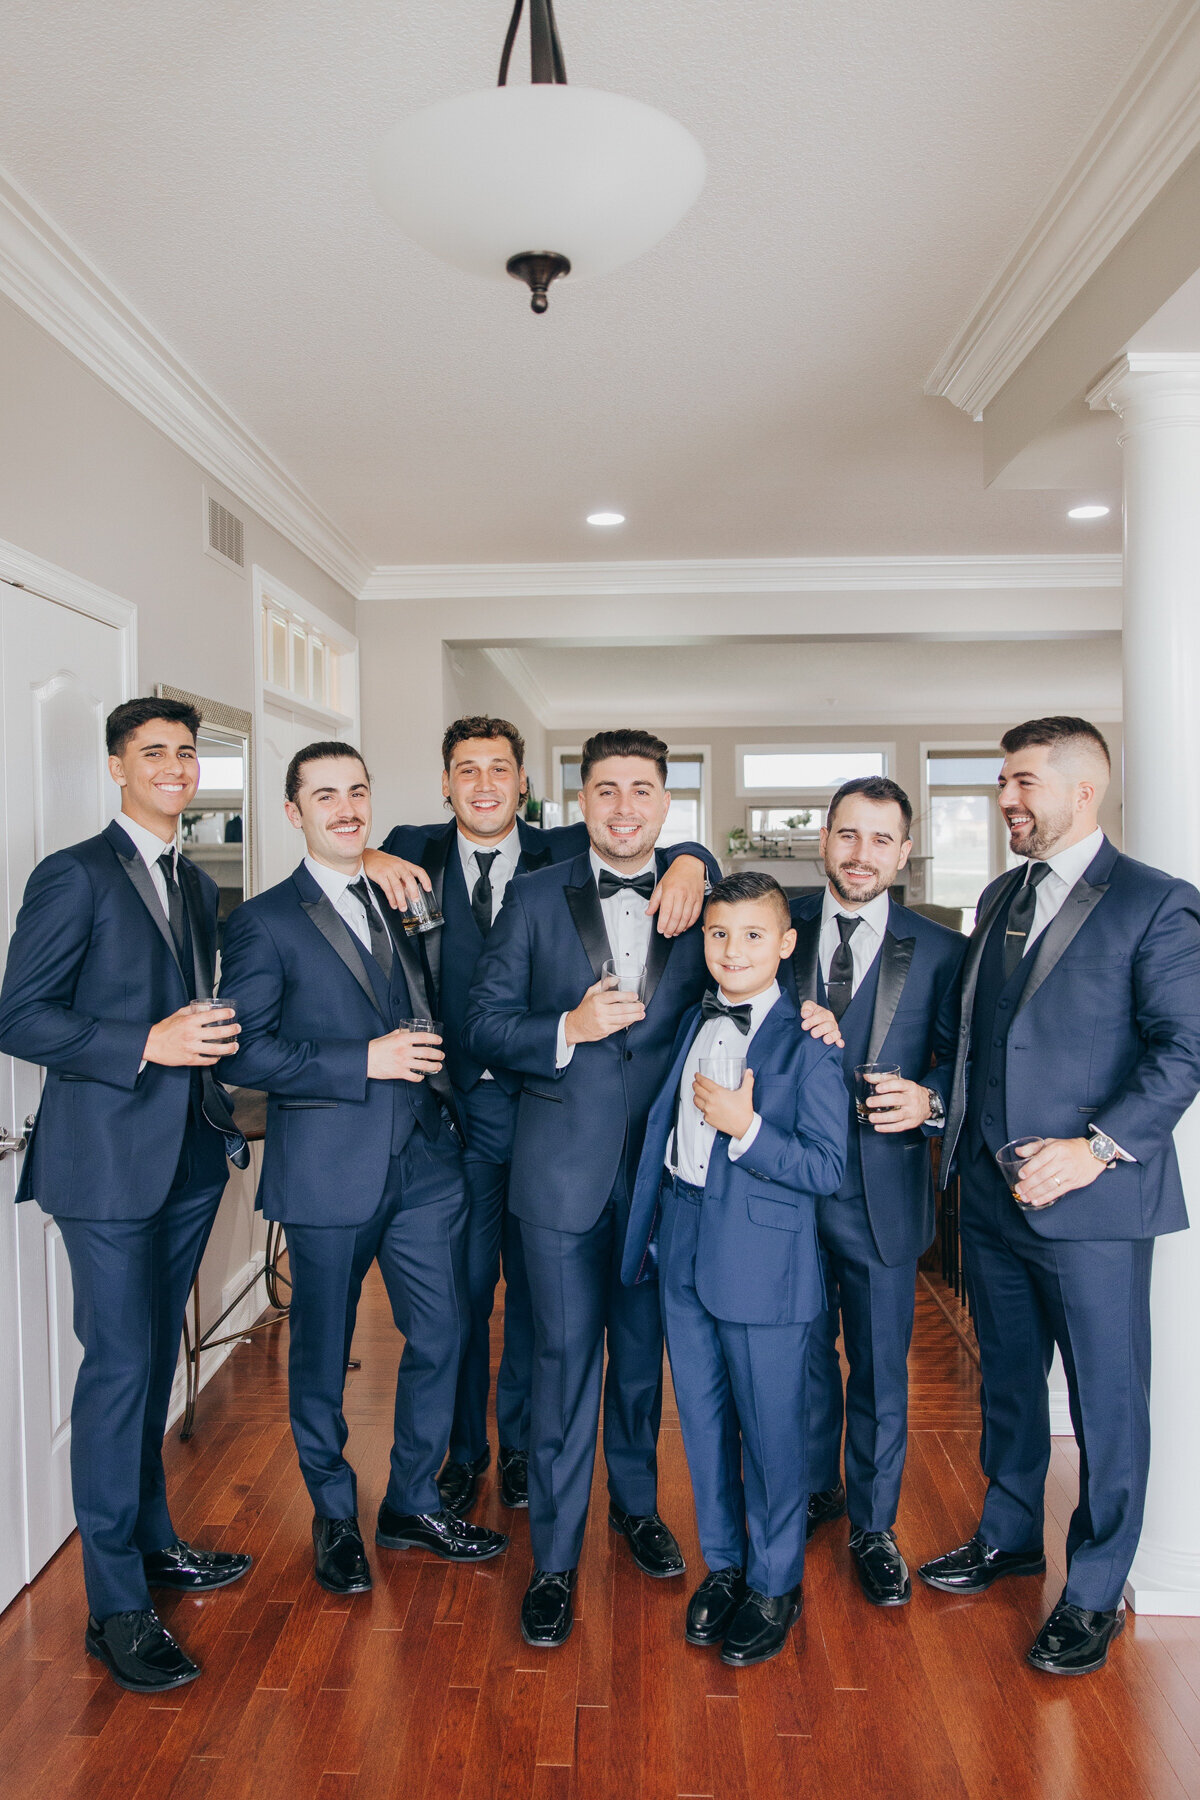 Groom and groomsmen sharing a toast on the wedding day